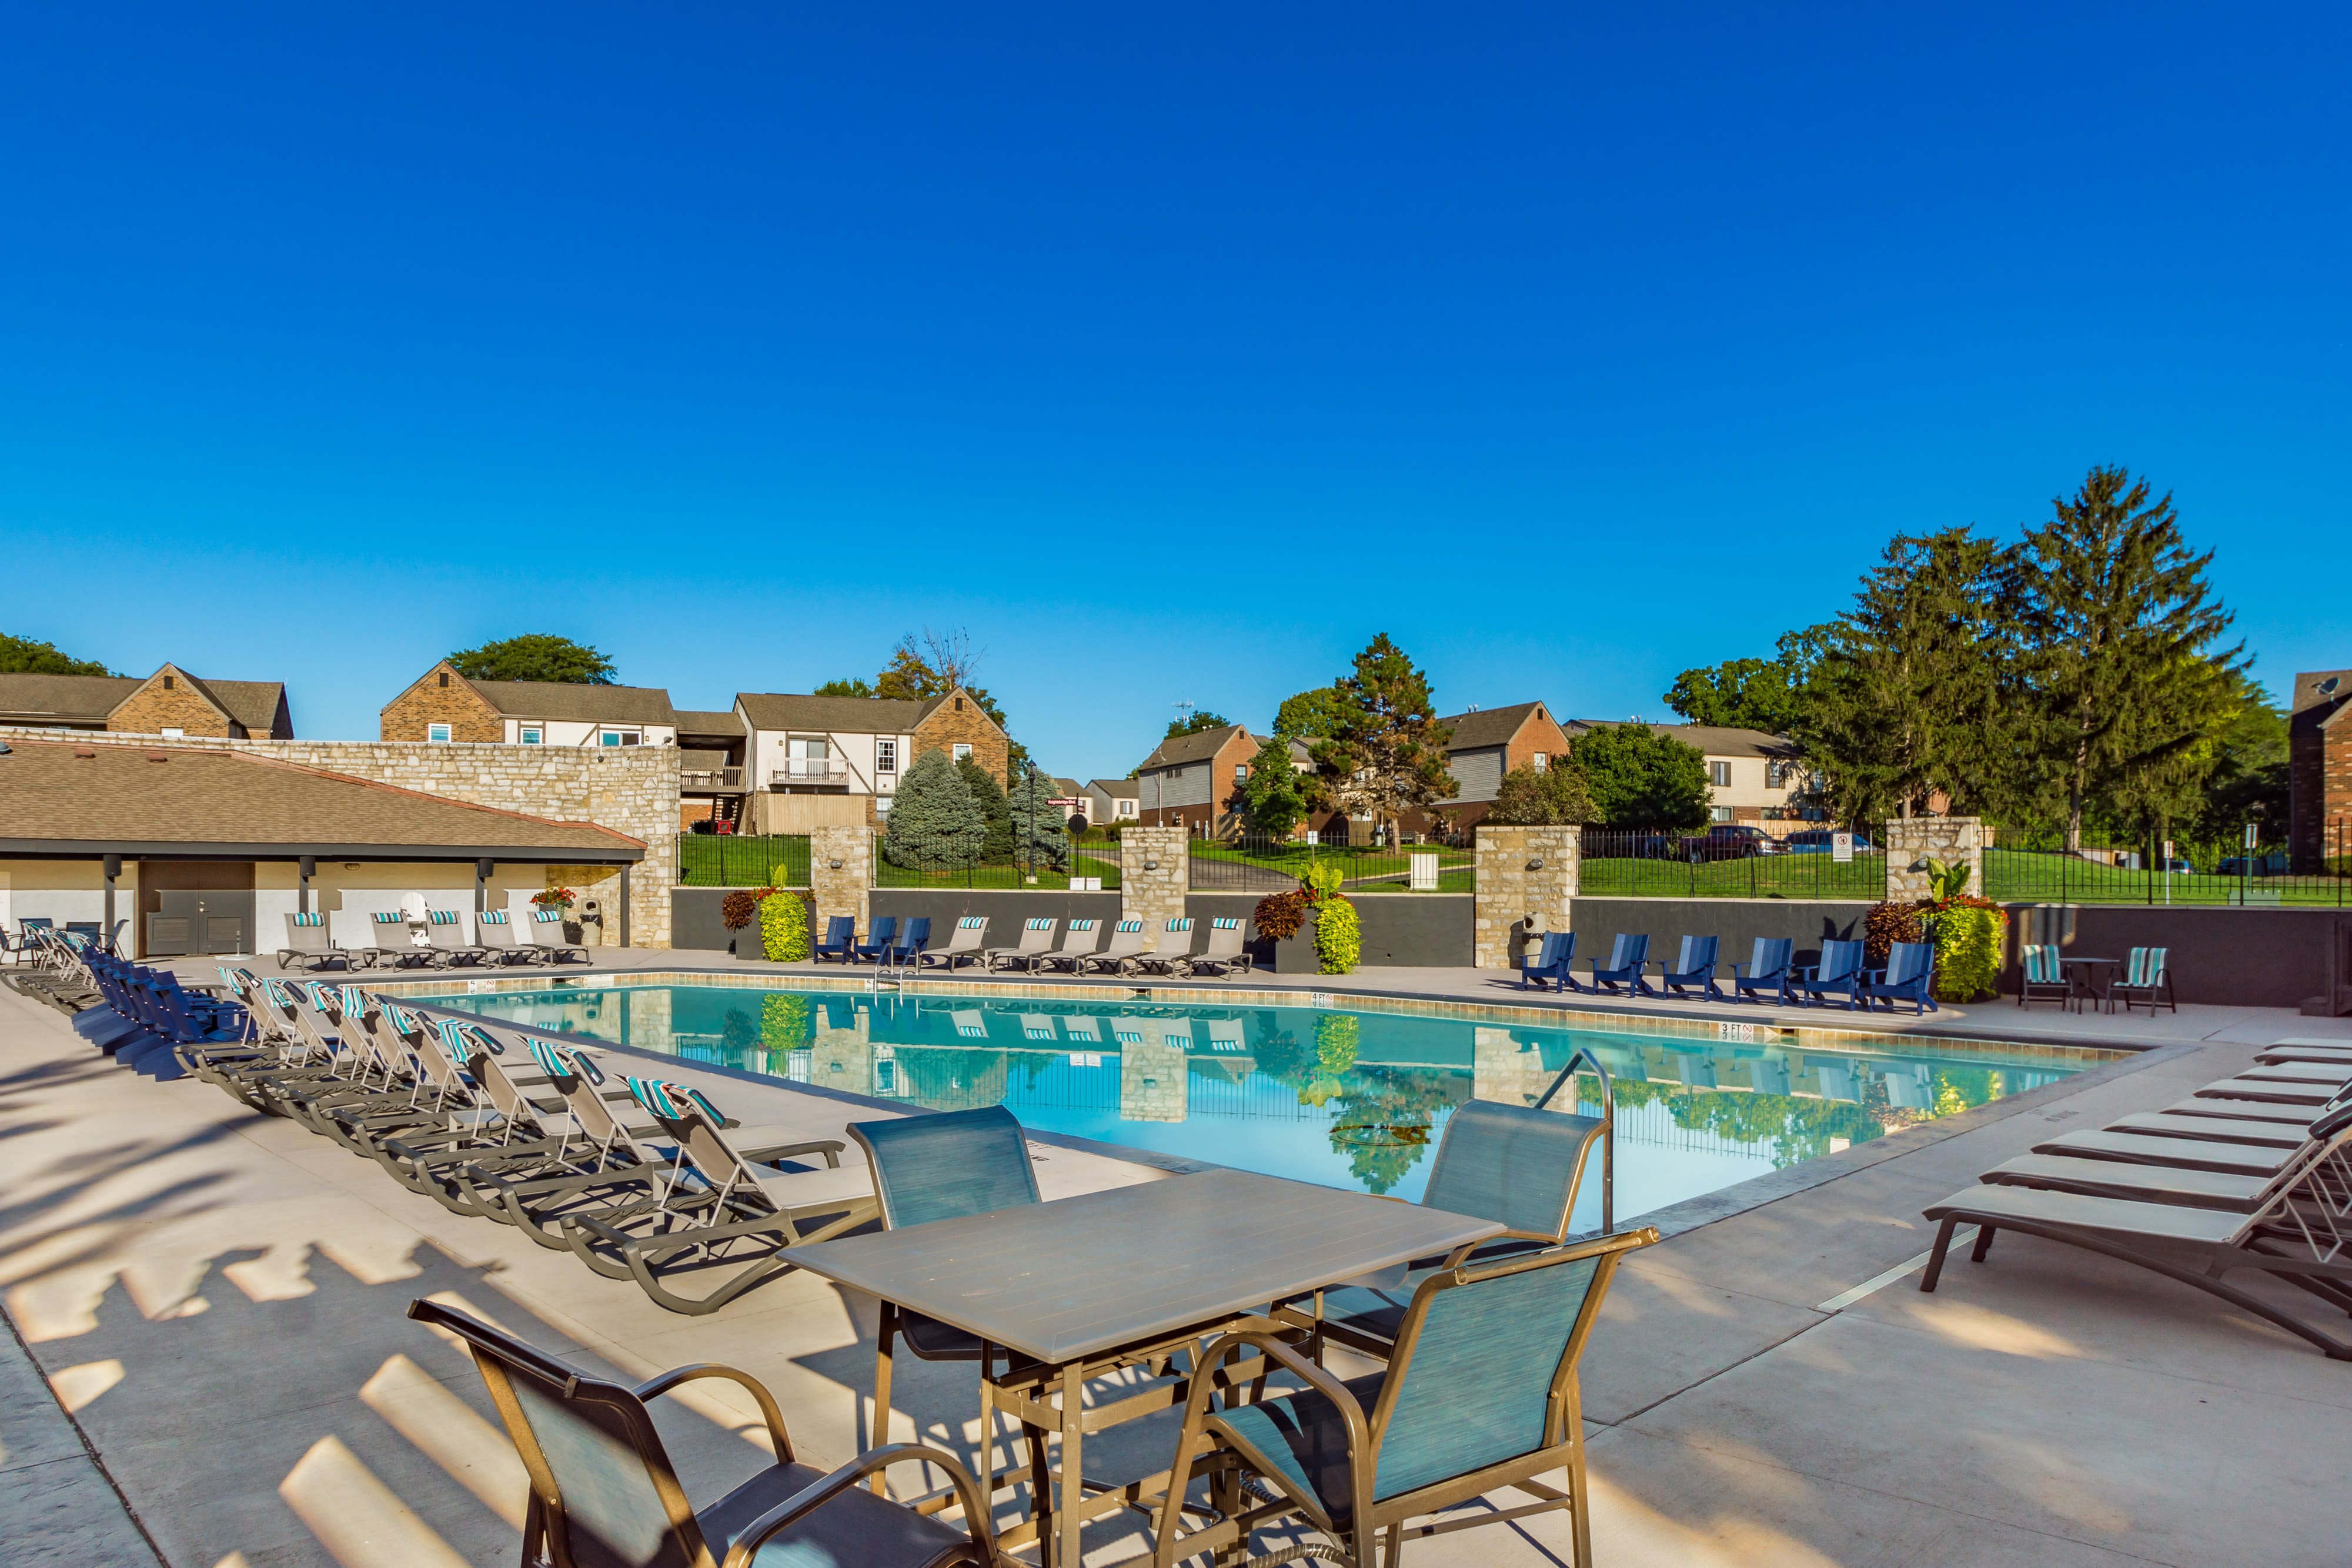 Wonderful pool with lounge chairs at The Commons at Olentangy in Columbus, Ohio